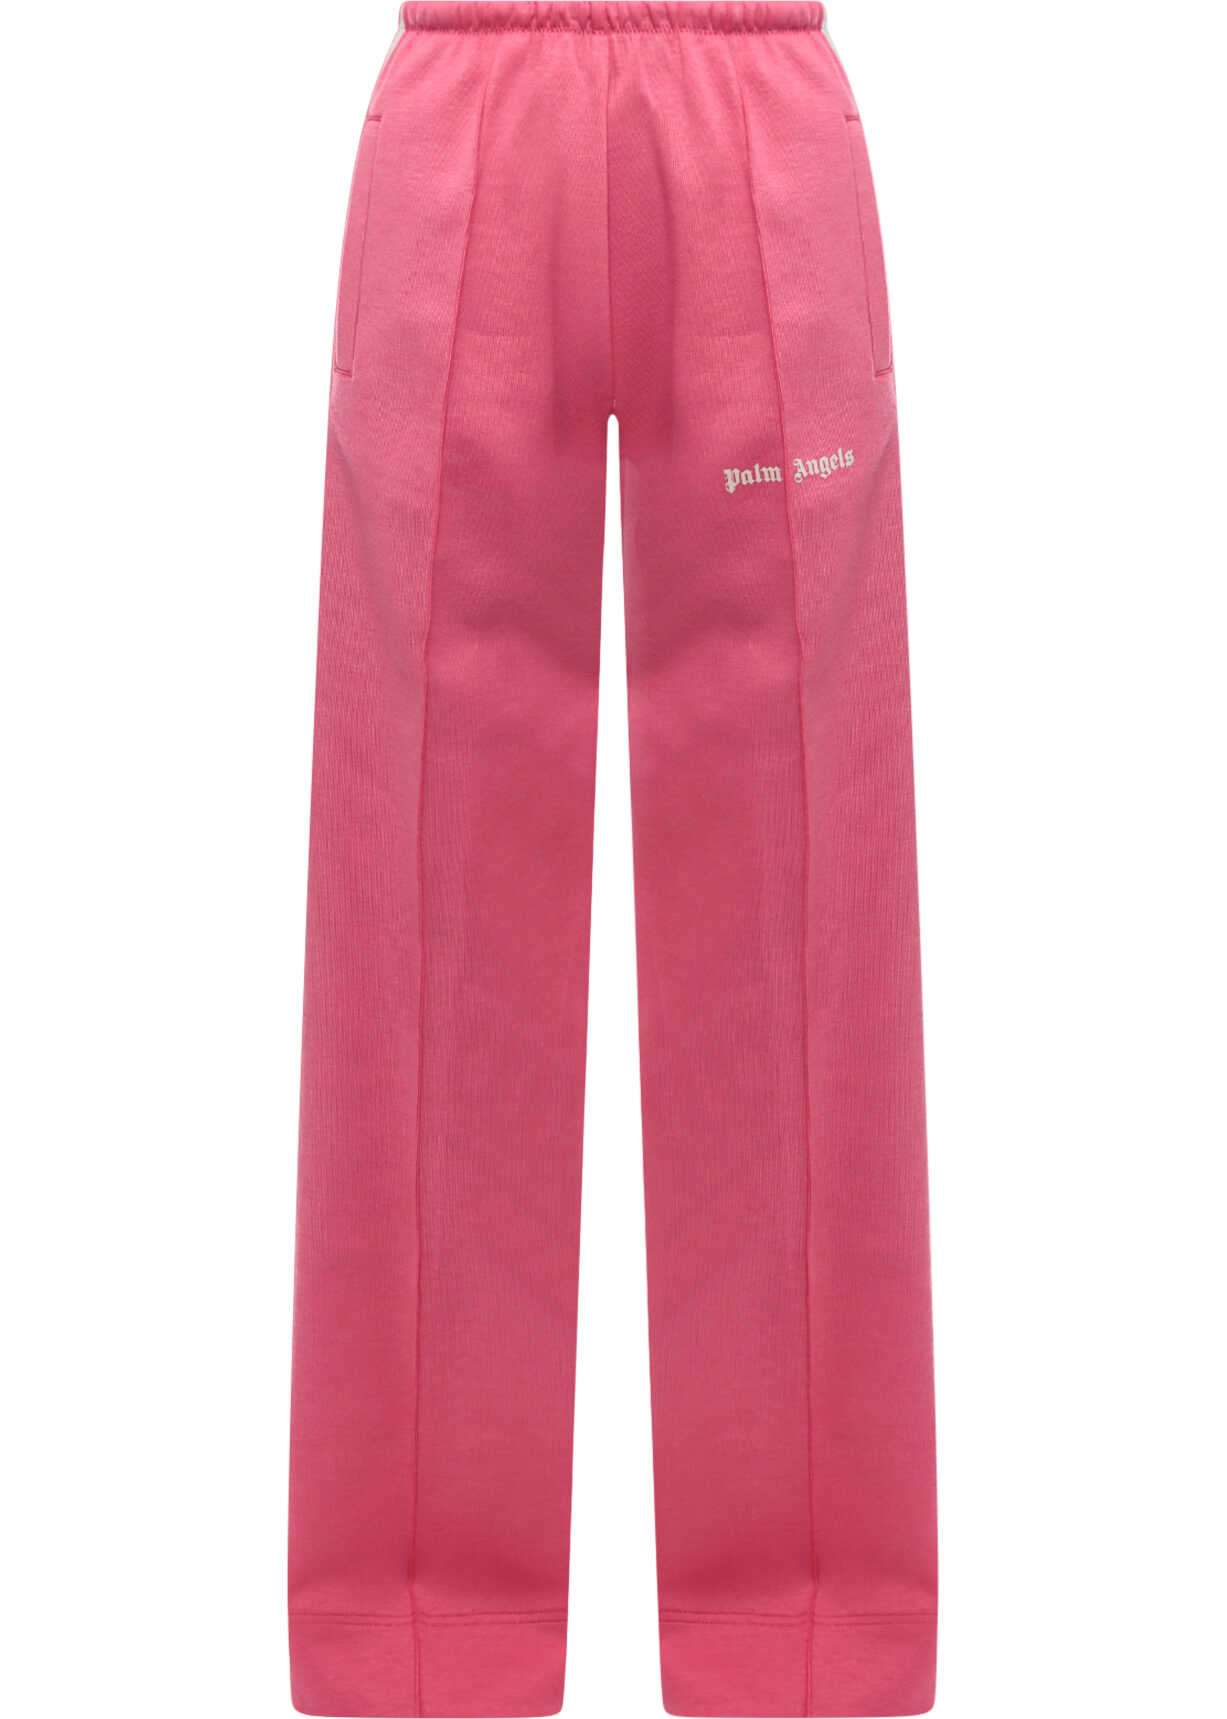 Palm Angels Trouser Pink